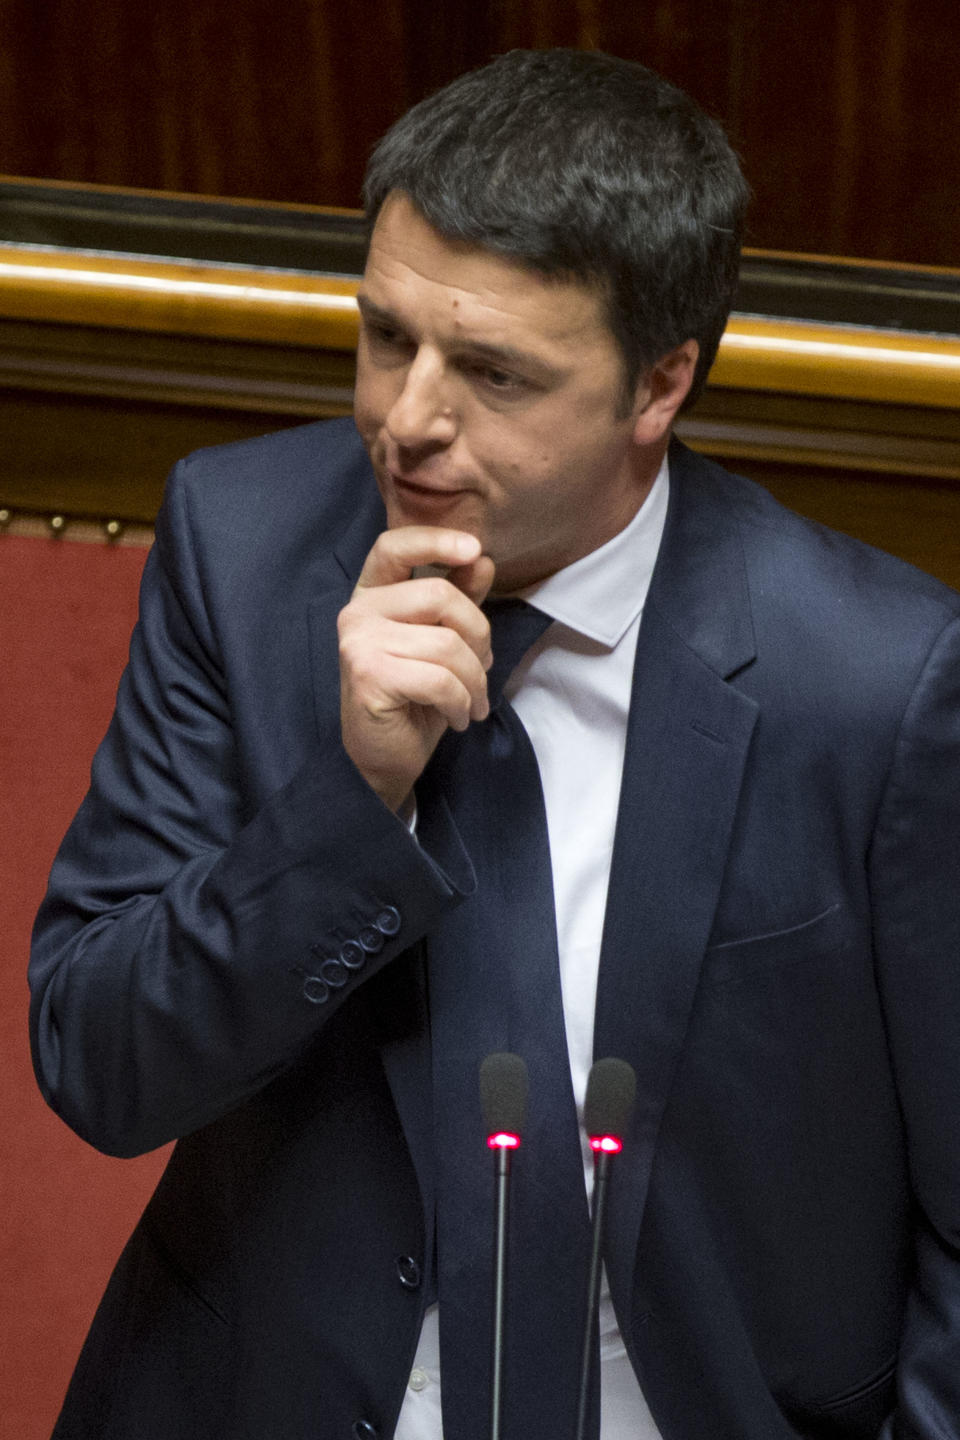 Premier Matteo Renzi delivers his speech prior to a confidence vote, at the Senate, in Rome, Monday, Feb. 24, 2014. Renzi is pitching for support in Parliament ahead of mandatory confidence votes on his brand-new coalition. Democratic Party leader Renzi told the Senate Monday he needs support for a "bold vision" that will get economically stagnate Italy dreaming again. Without giving details, Renzi said debt-laden Italy must heal its public finances not because Germany's leader, Angela Merkel or the European Central Bank chief want us "to get serous" but because "it's our children" who seek a future. (AP Photo/Andrew Medichini)